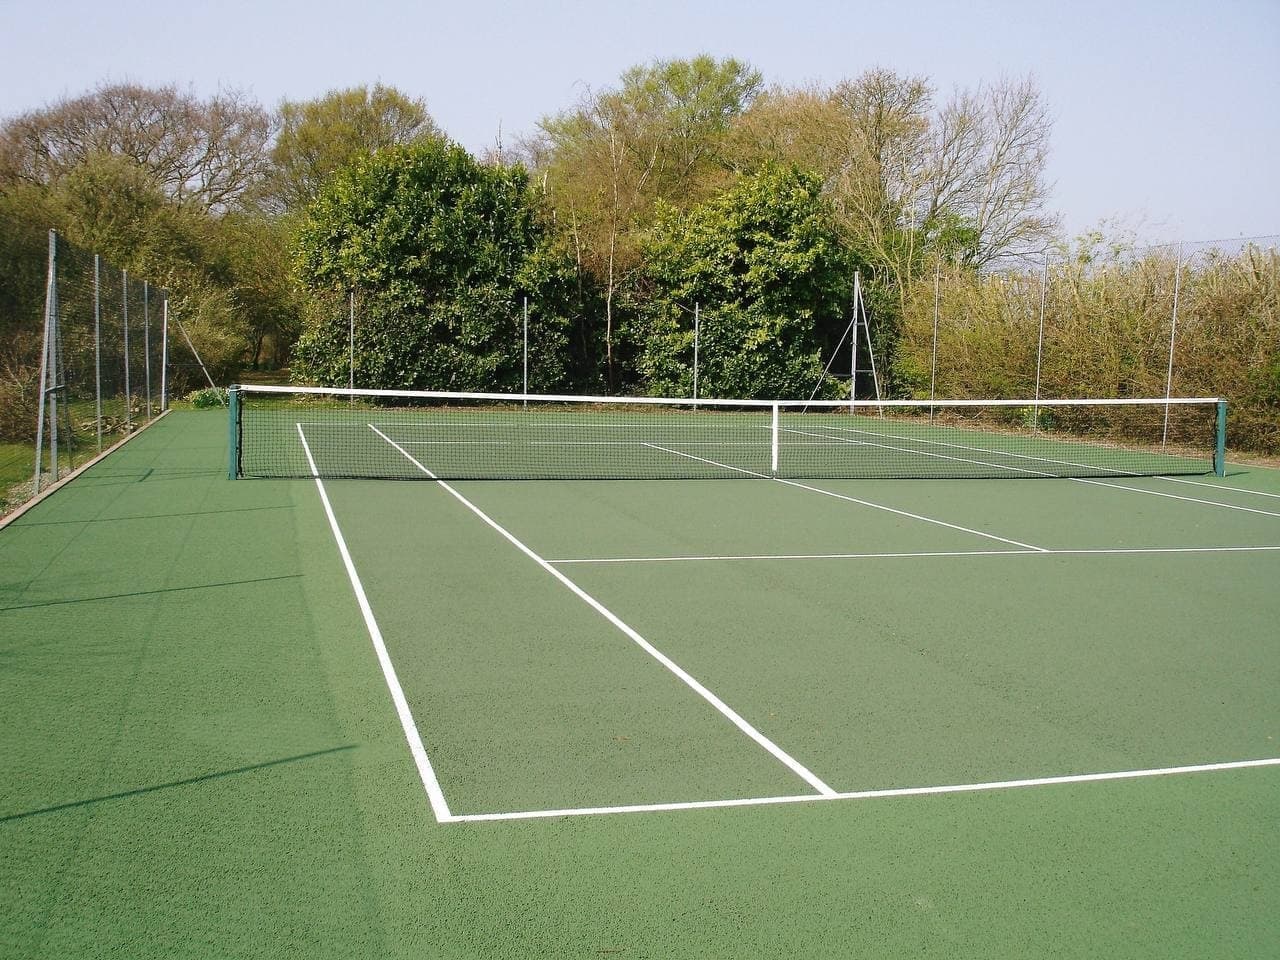 Newly constructed tennis court in Portsmouth